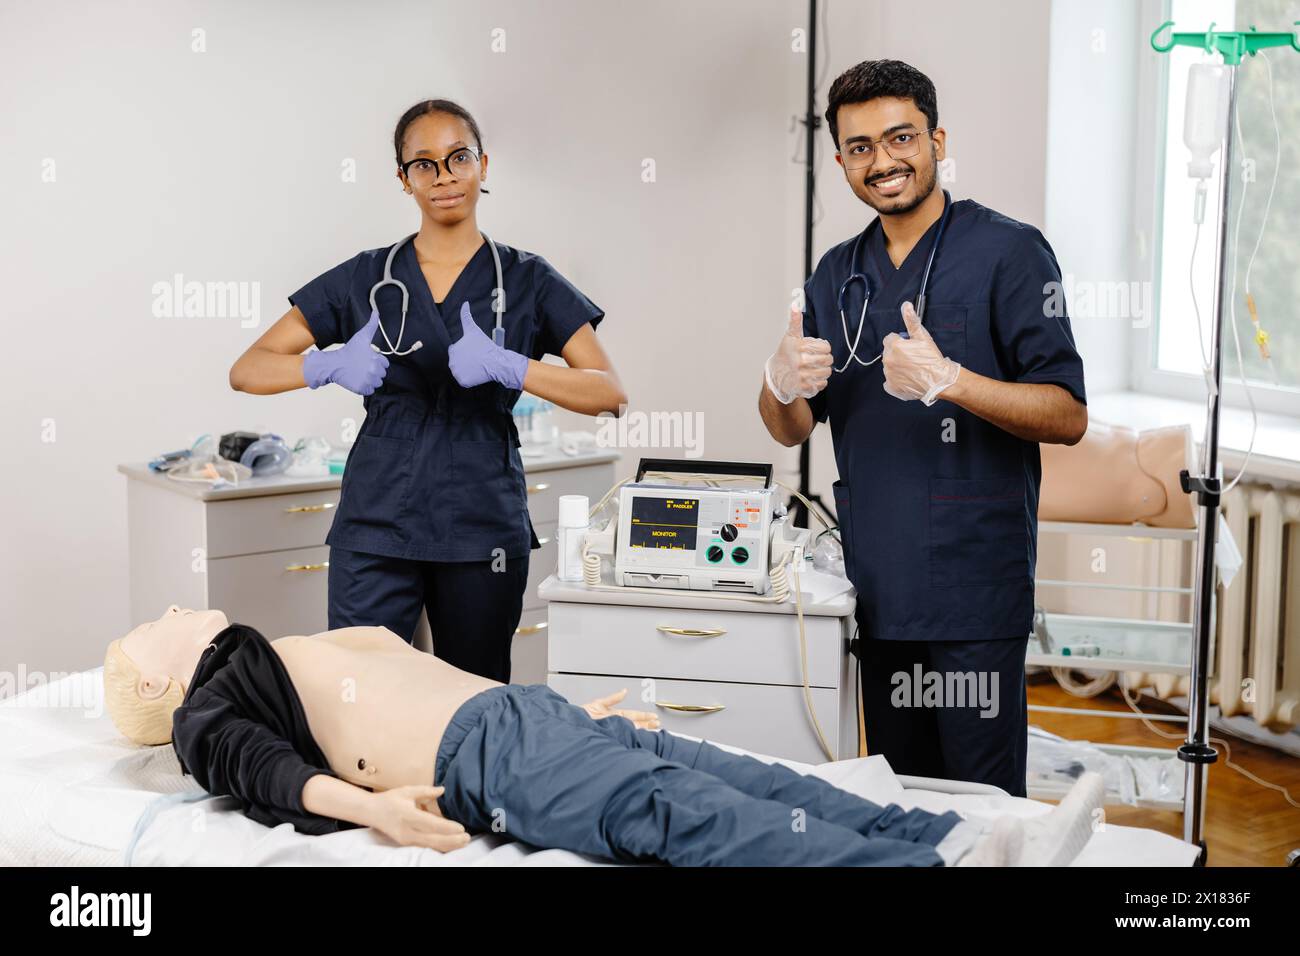 Two doctors in hospital attire standing over a medical dummy, examining and discussing medical procedures and techniques. Stock Photo